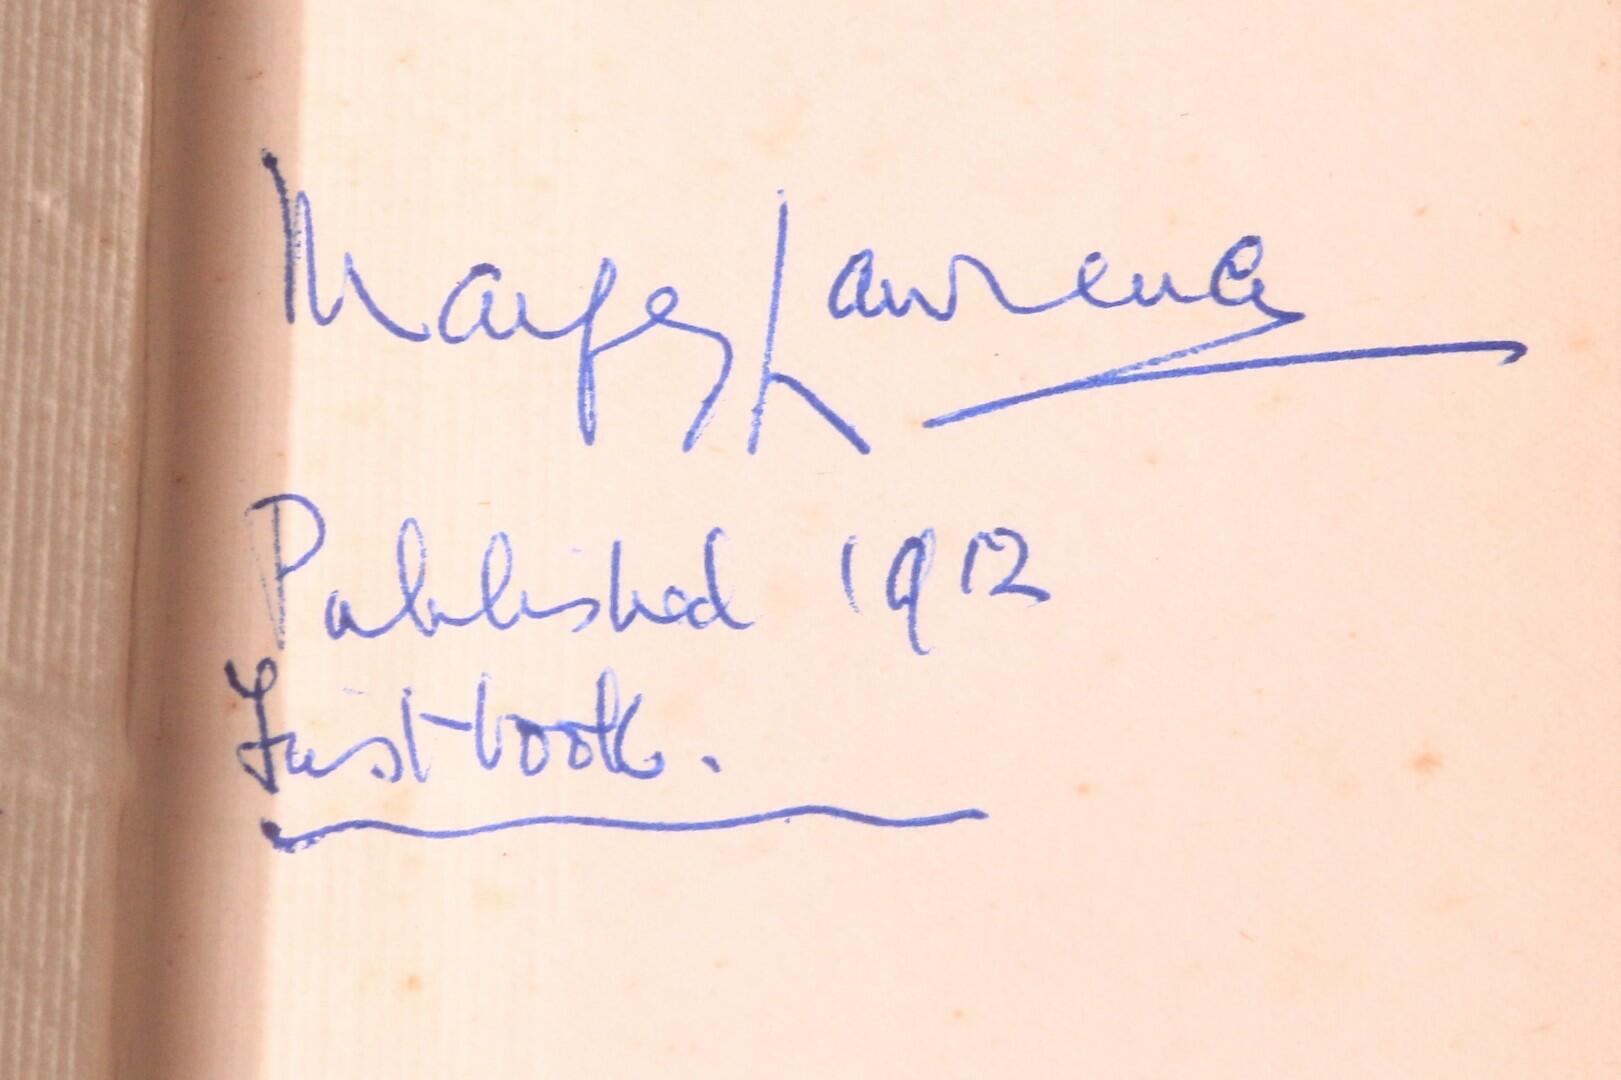 Margery Lawrence - The Author's Own Copies of Her Books, Each Signed - Various, 1912-1959, Signed First Edition.